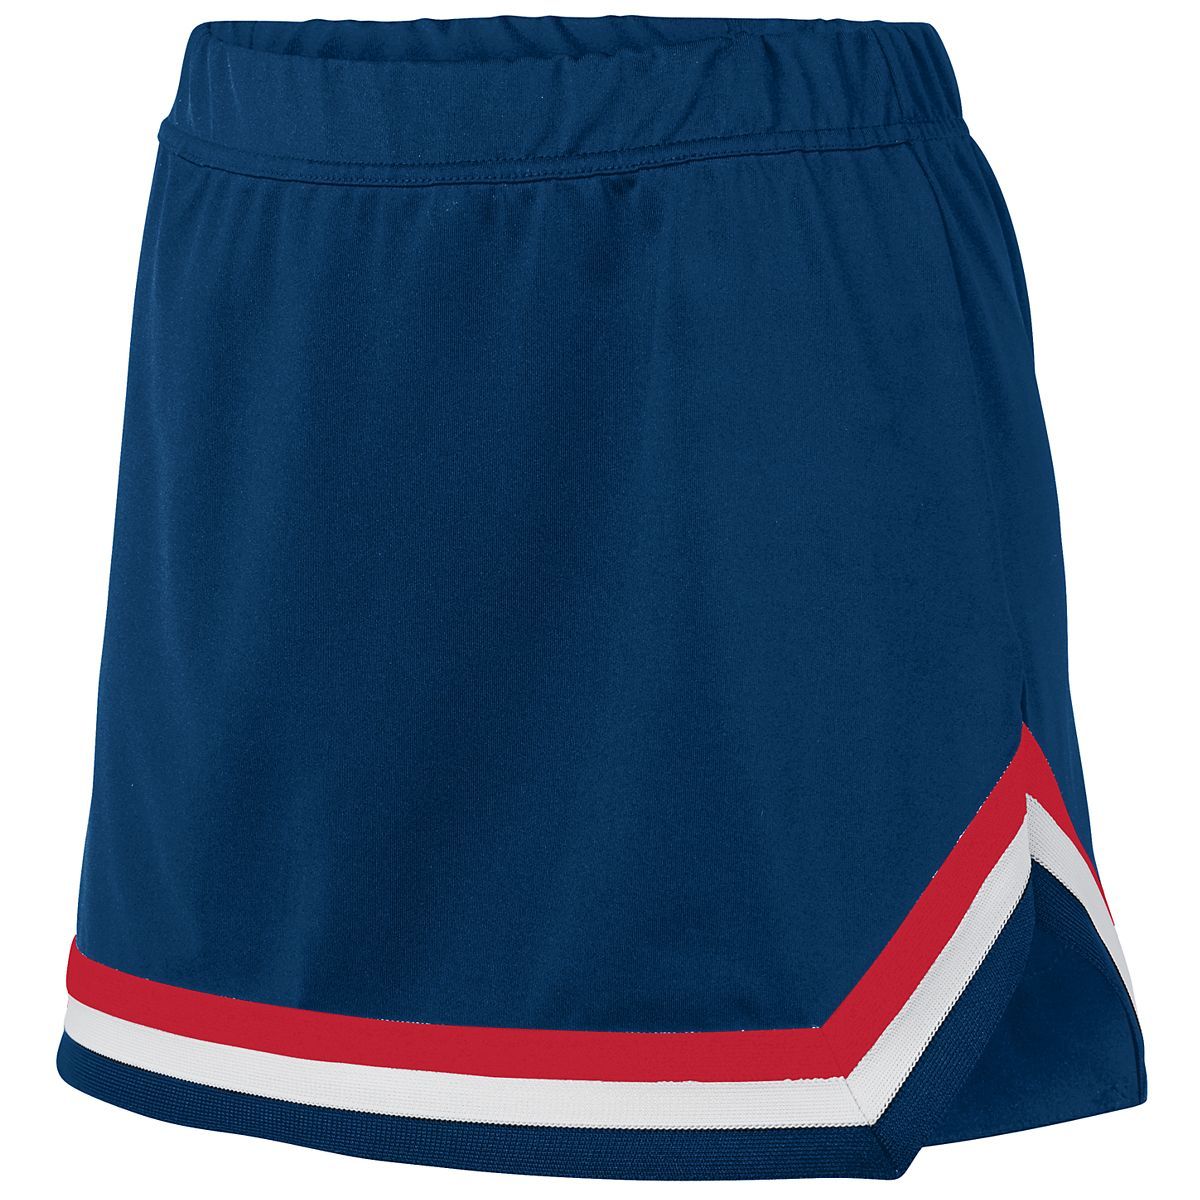 Augusta Sportswear Girls Pike Skirt in Navy/Red/White  -Part of the Girls, Augusta-Products, Cheer product lines at KanaleyCreations.com